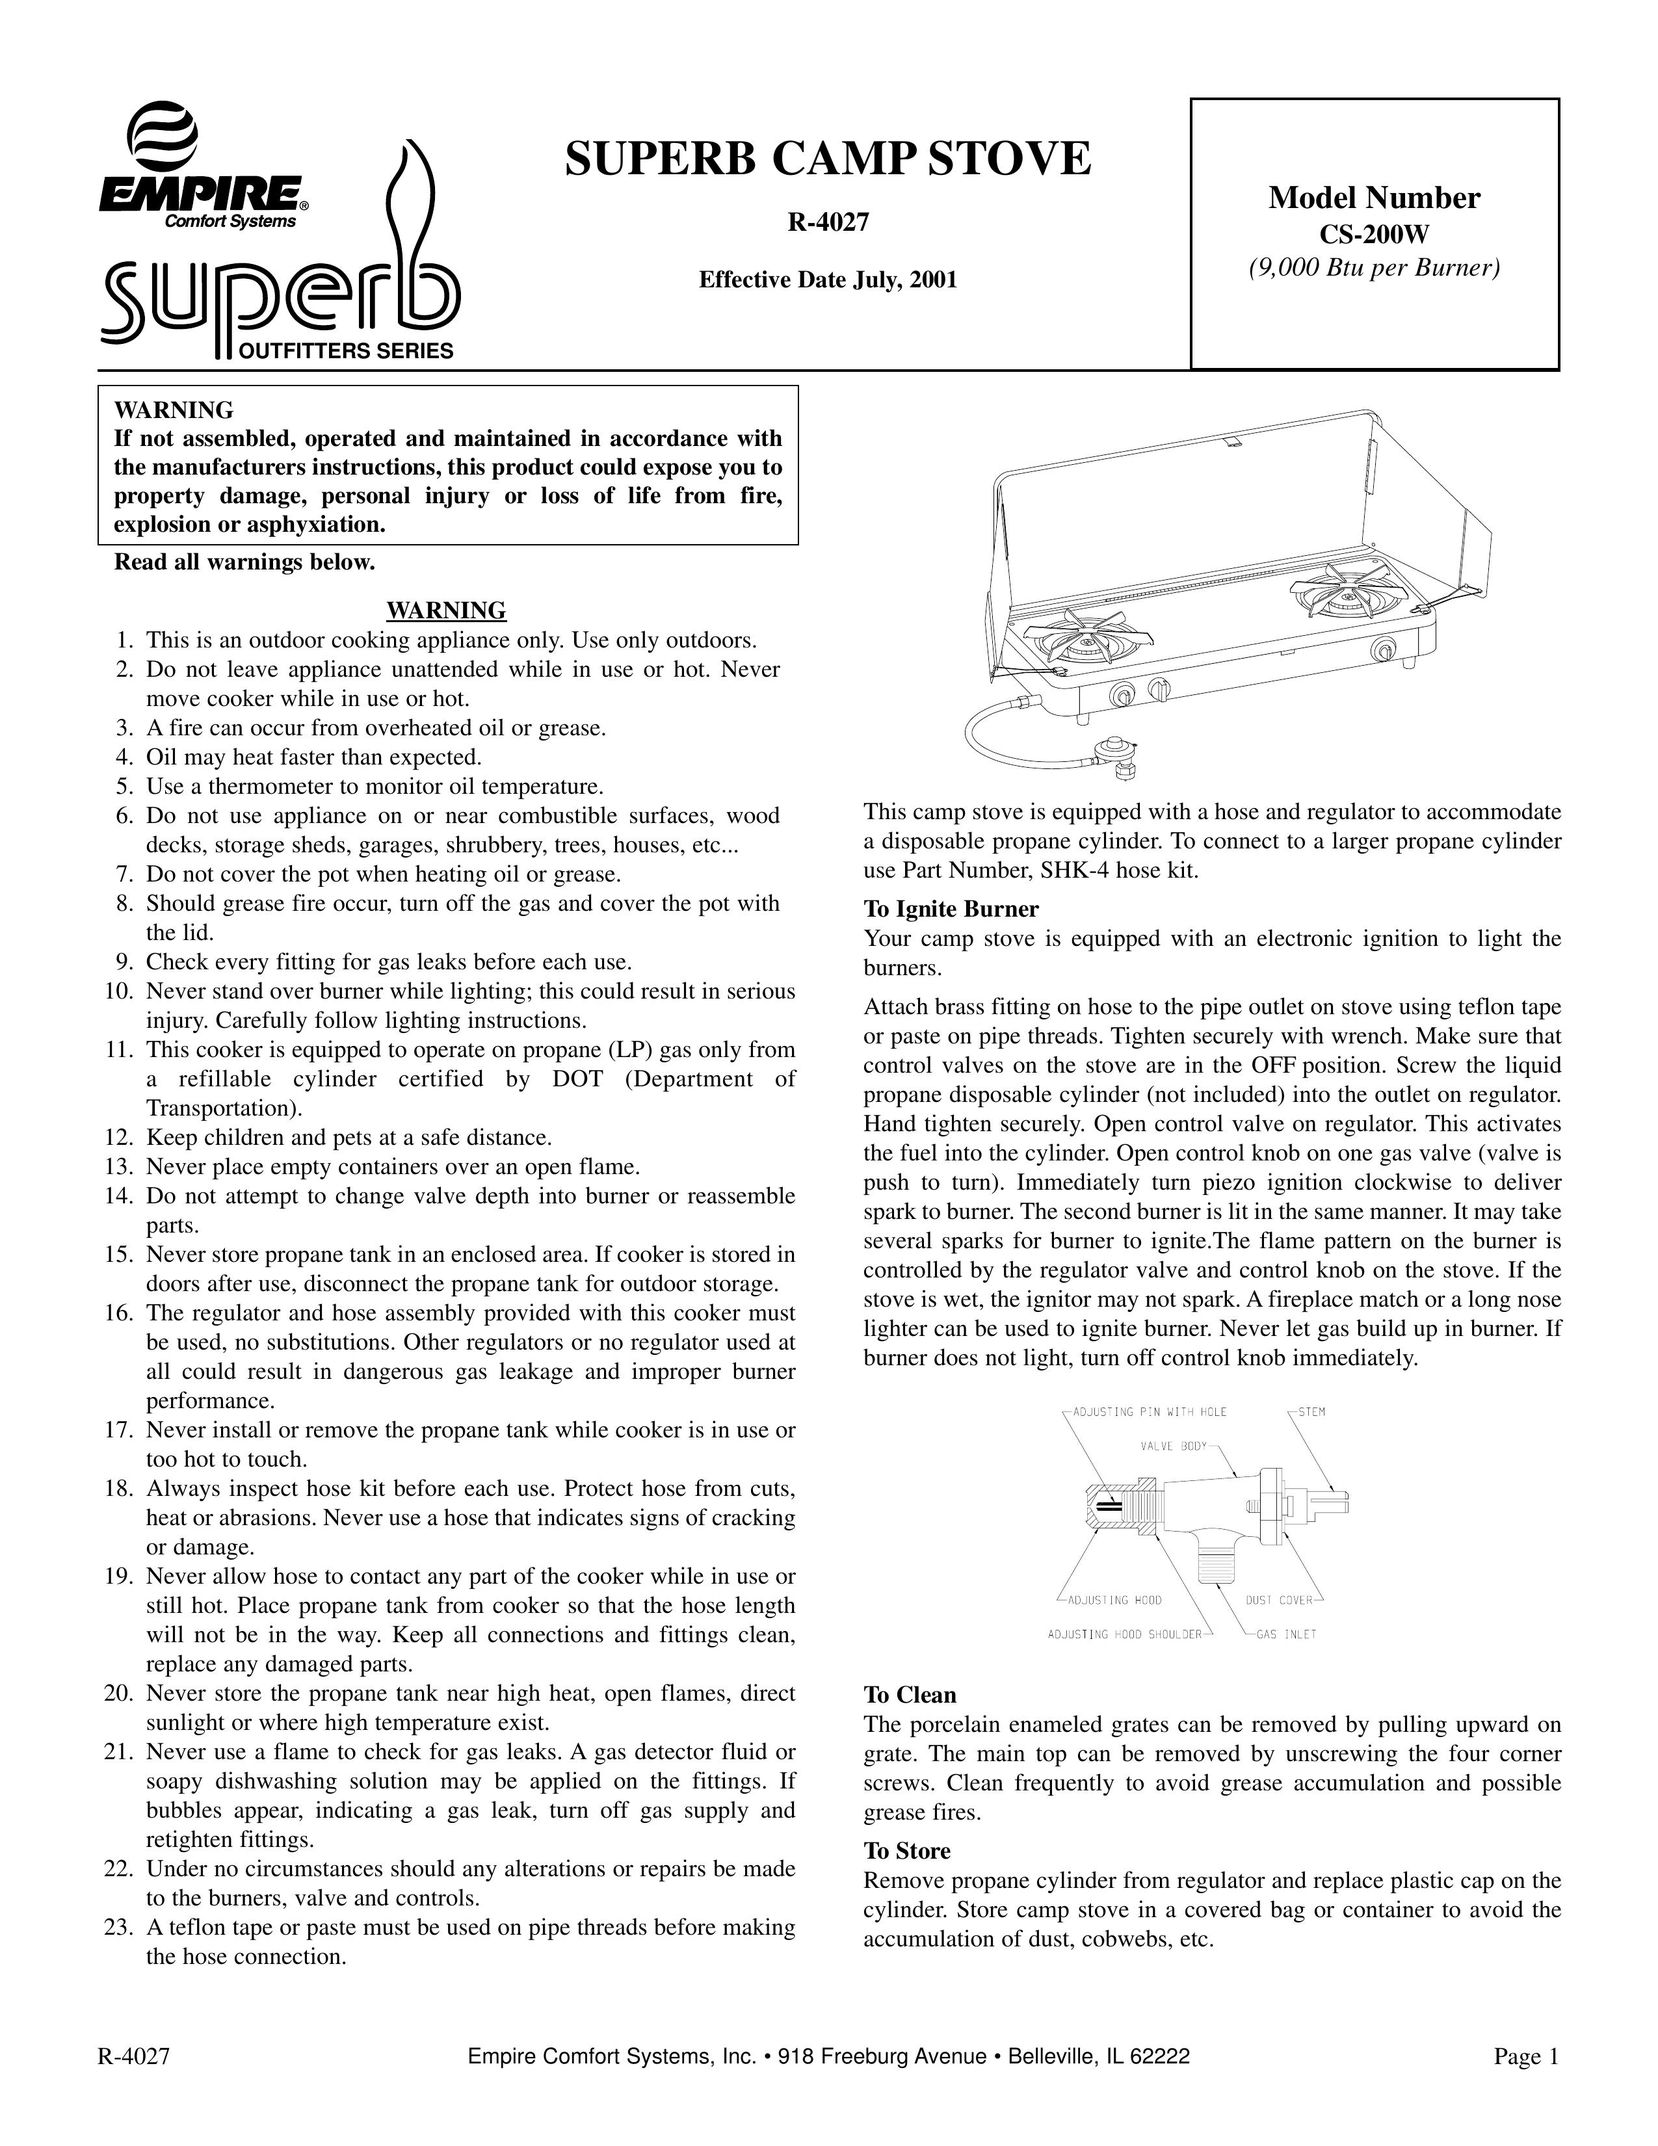 Empire Comfort Systems CS200W Stove User Manual